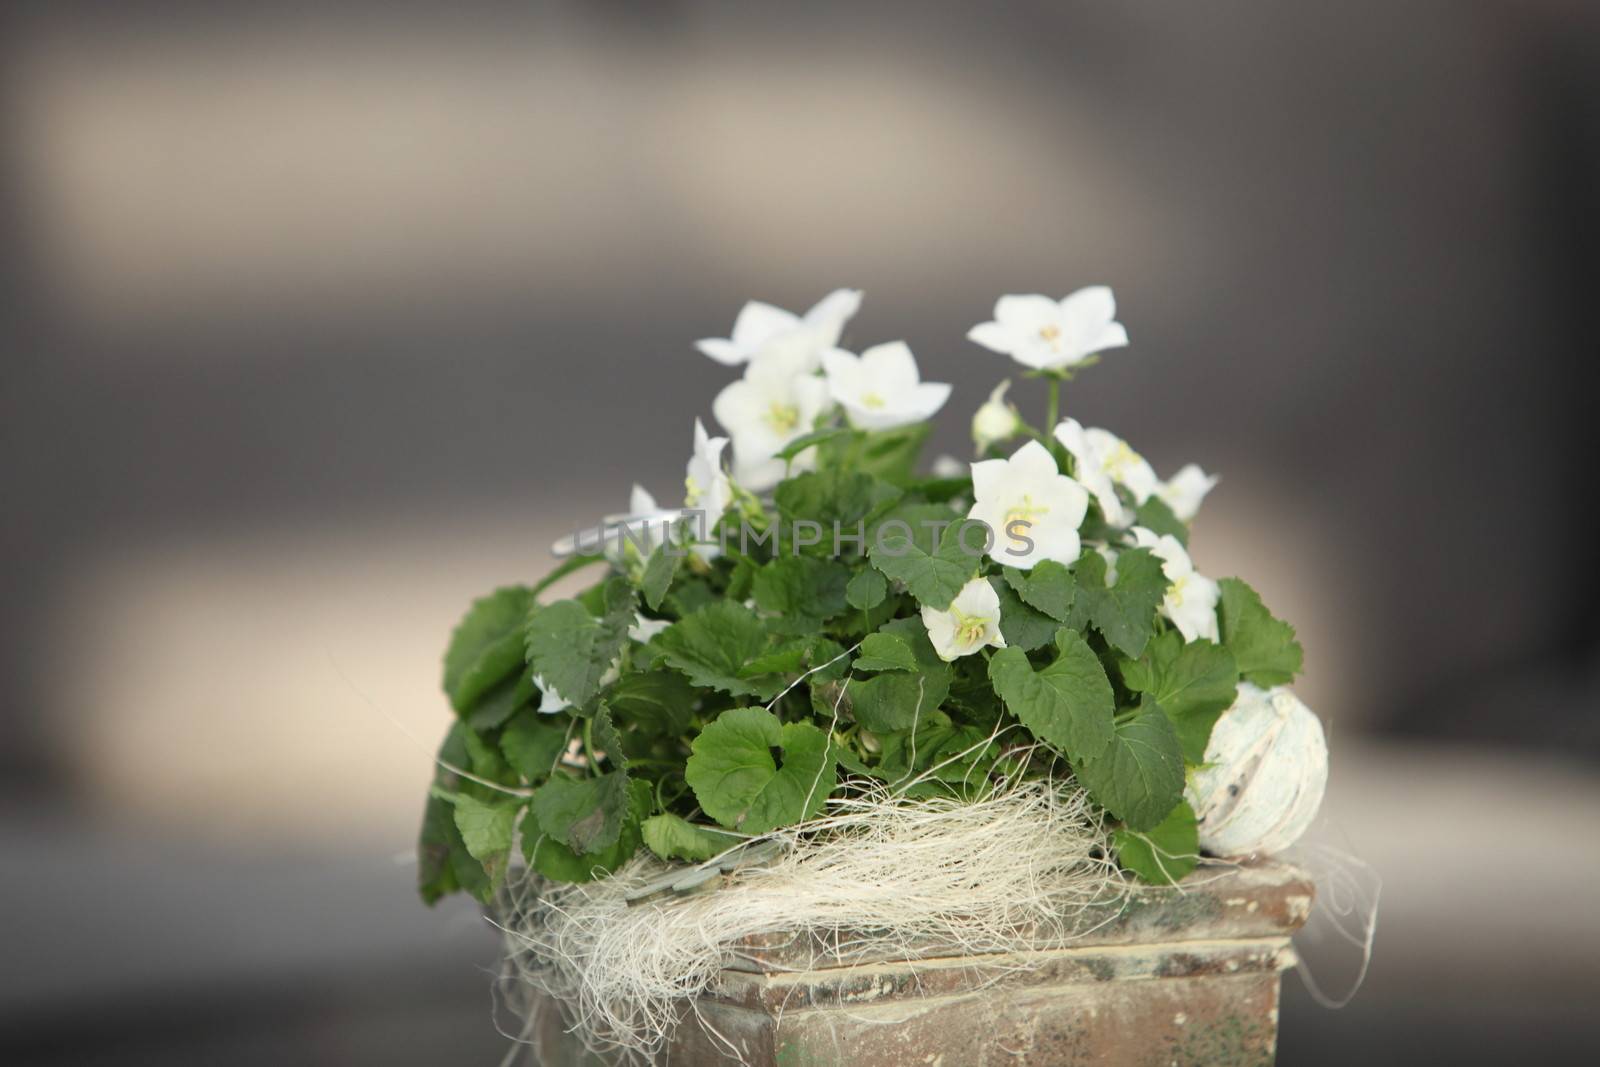 Dainty white violets growing in a container with straw covering the soil, close up view with shallow dof and copyspace